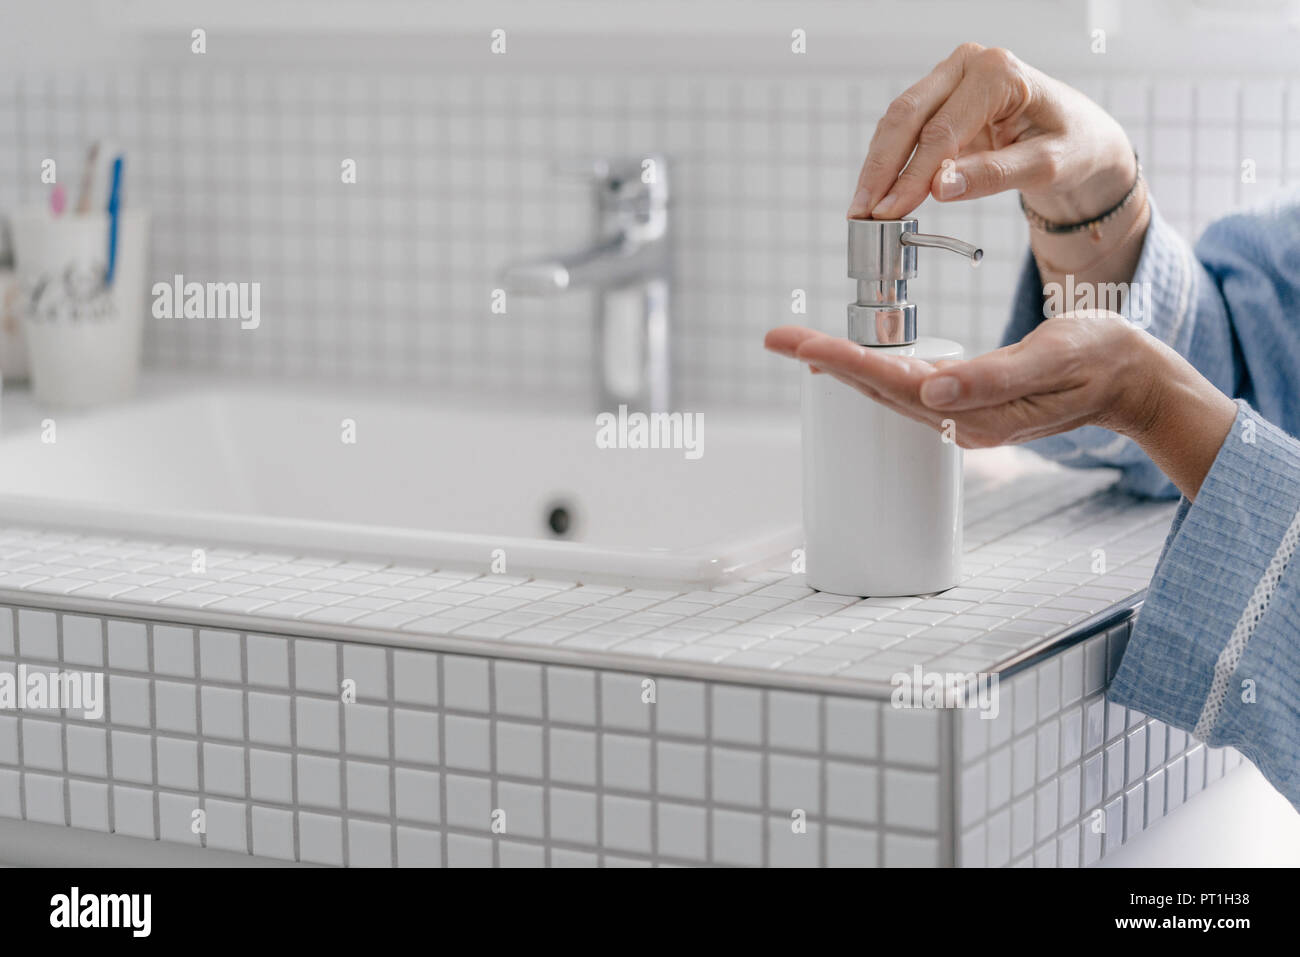 Close-up of woman wputting soap on her hands in bathroom Stock Photo